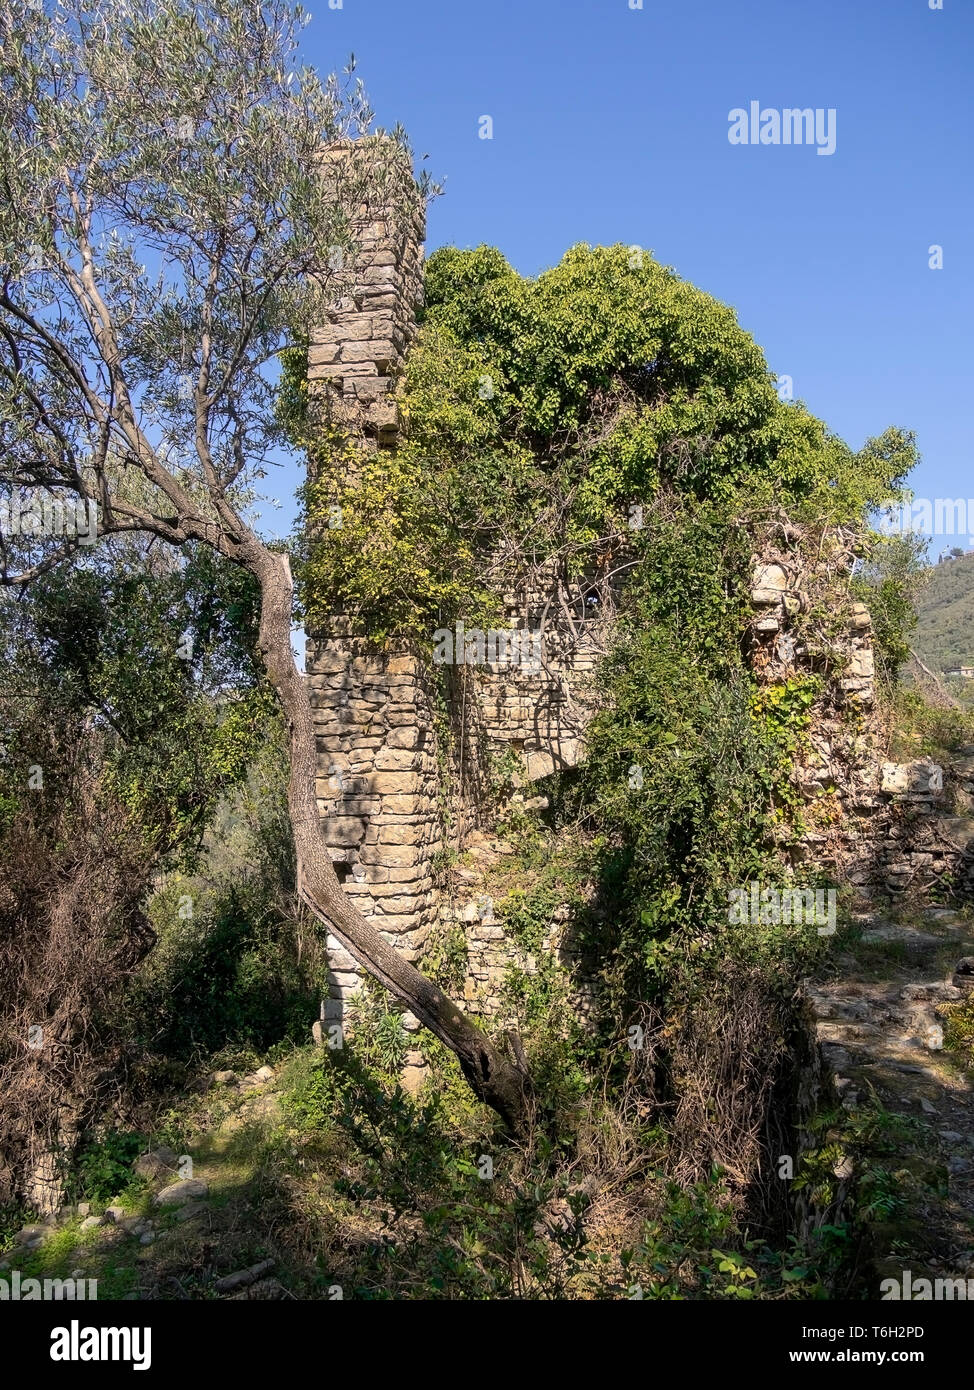 The old watchtower, Barbazzano, ancient fortified ruins near Lerici, Italy. Stock Photo